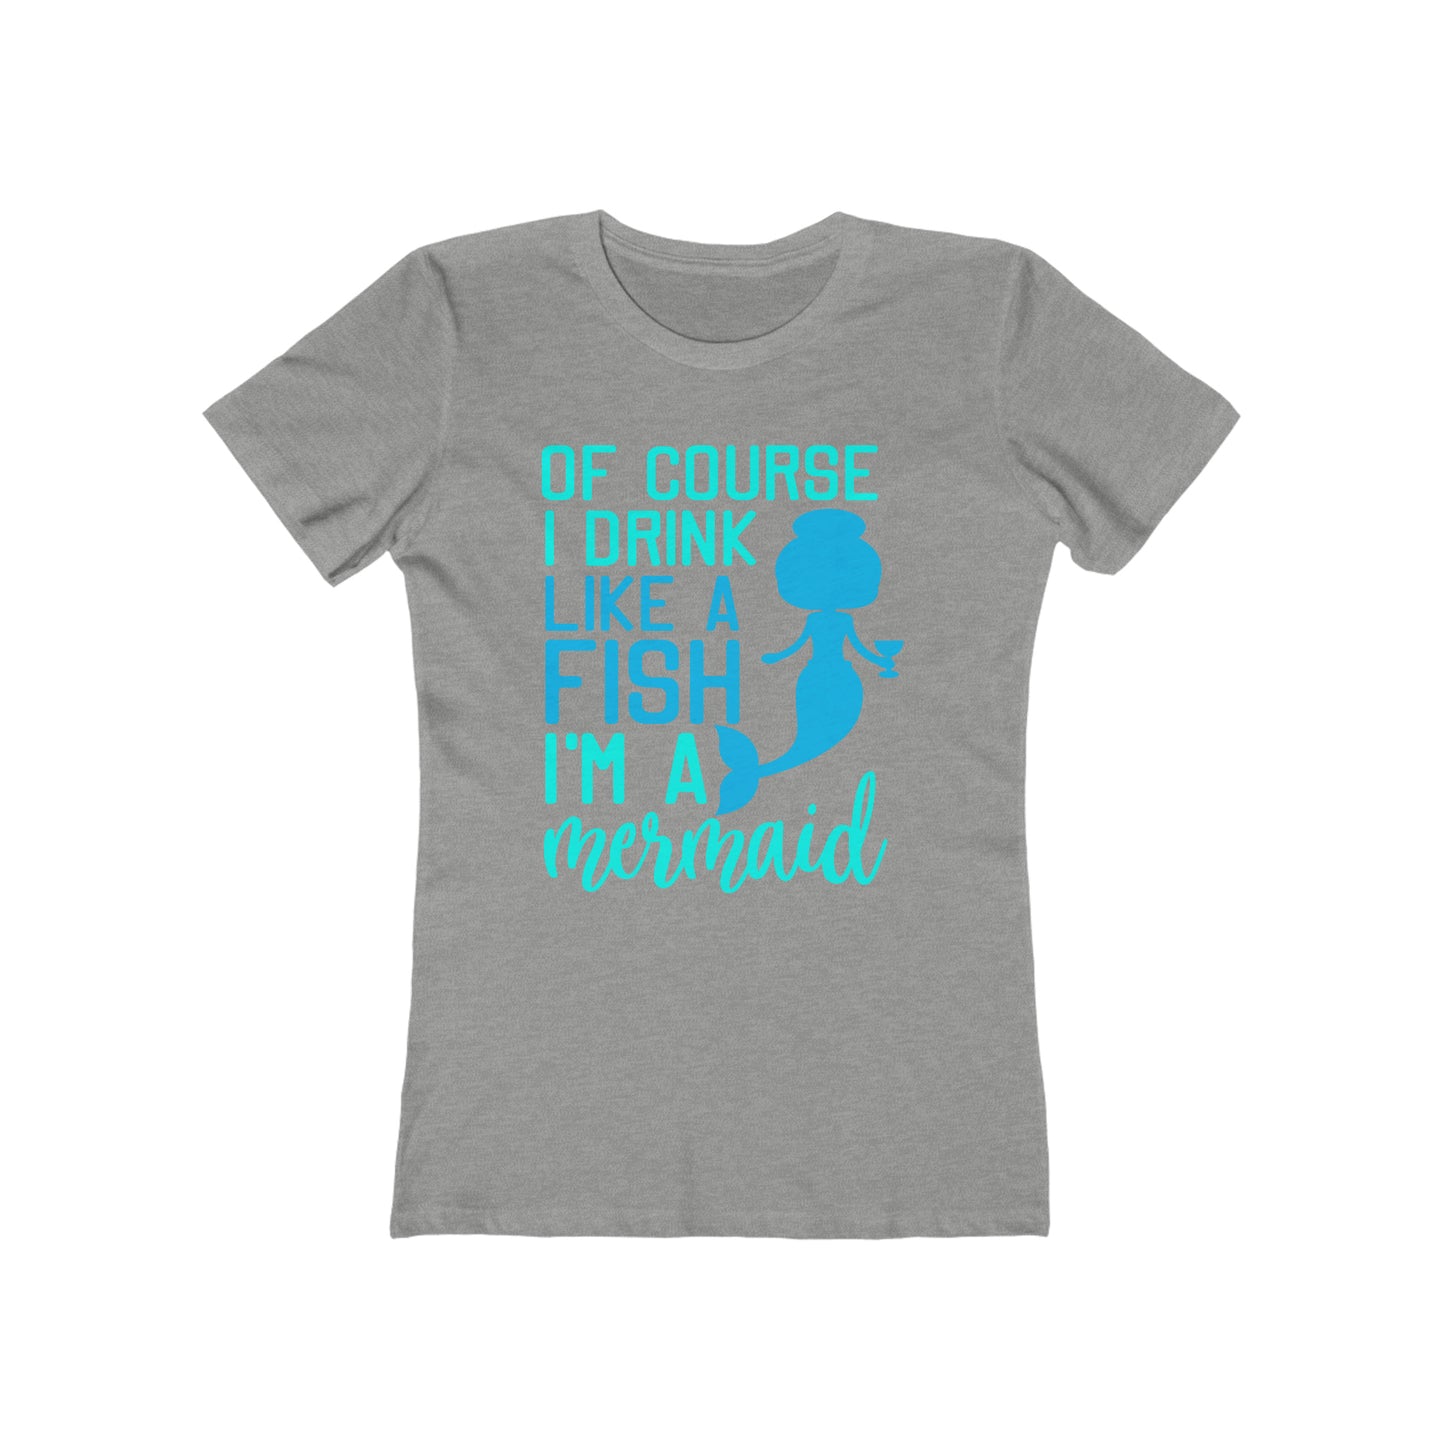 Of Course I Drink Like A Fish I'm A Mermaid - Women's T-shirt